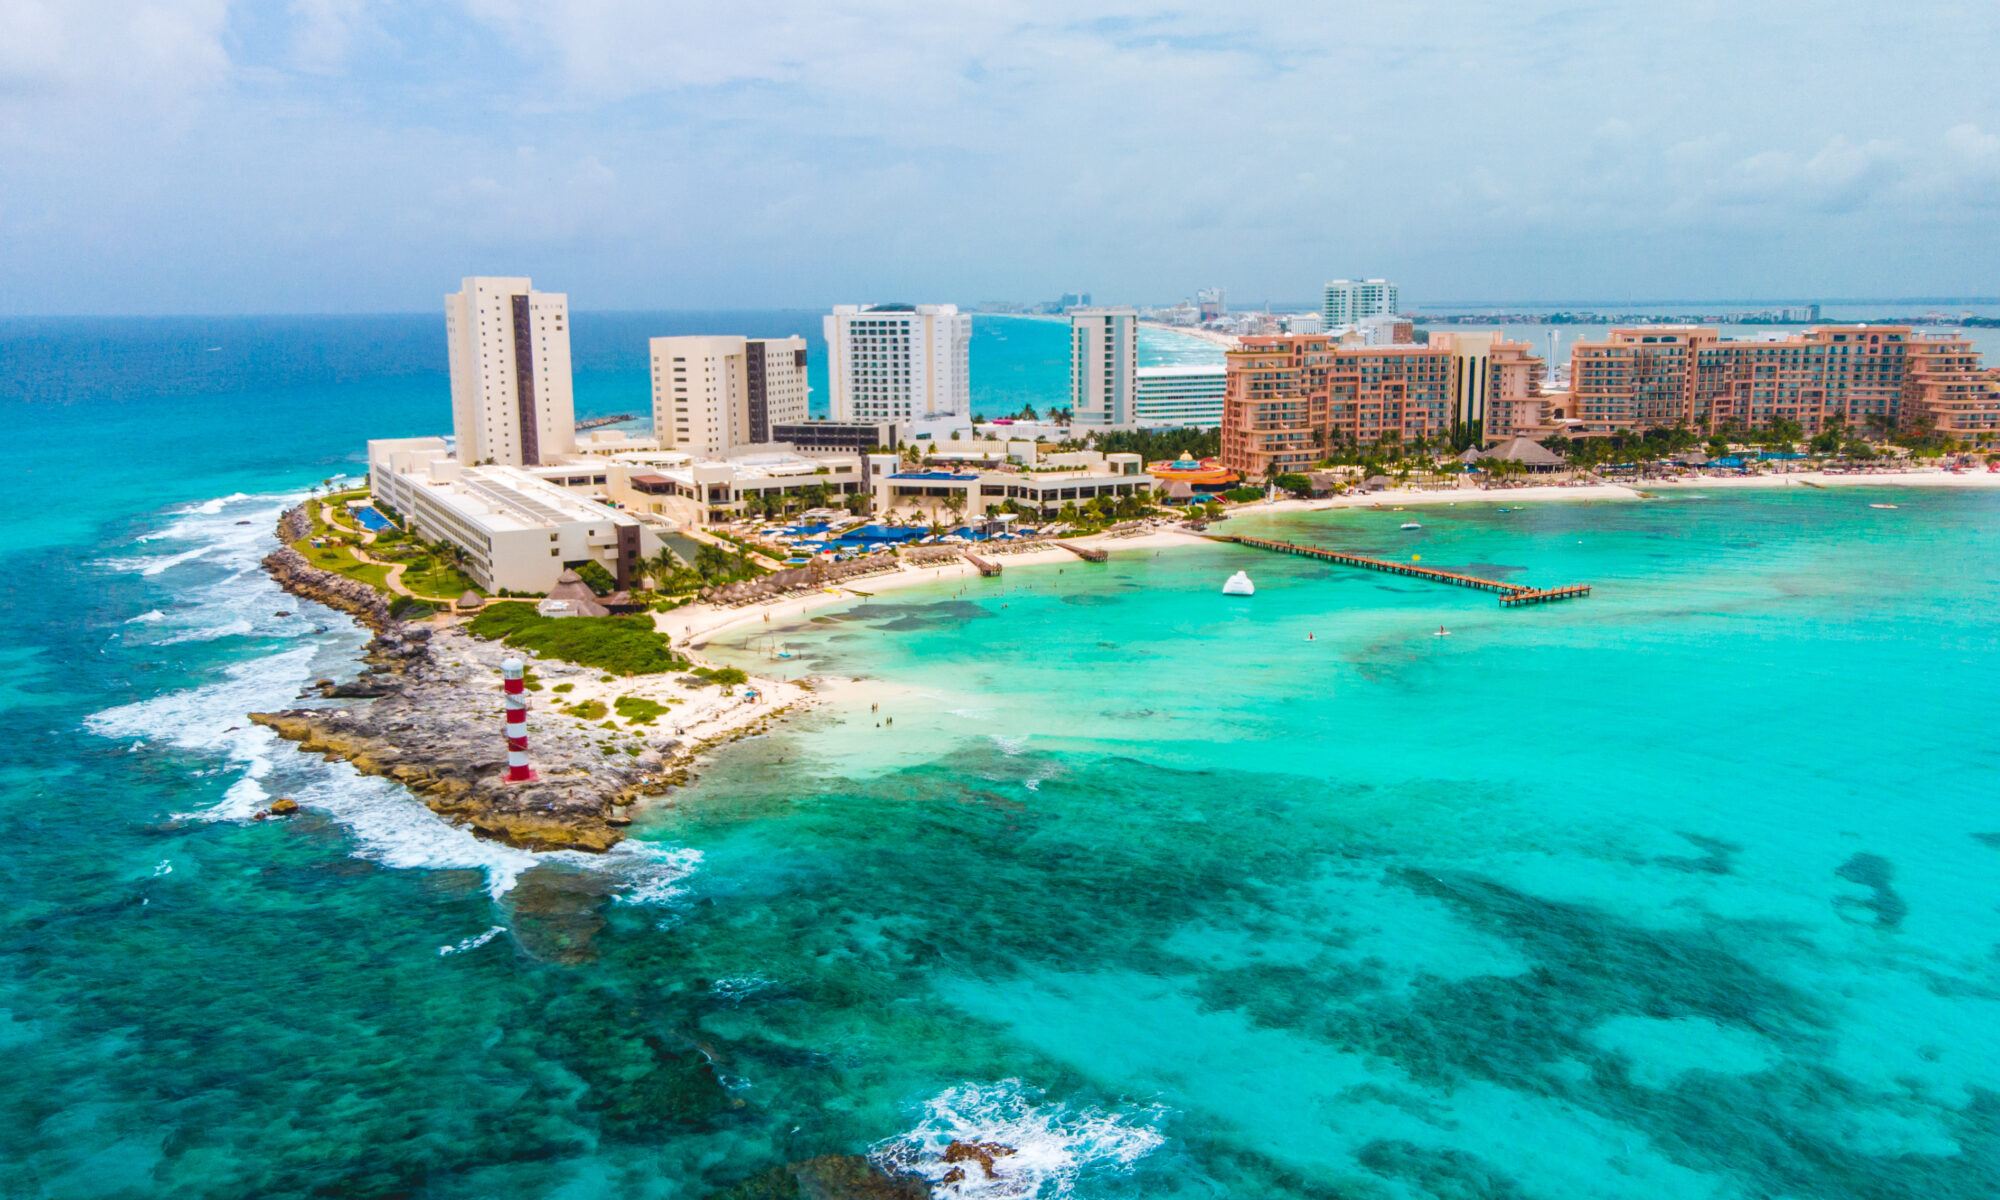 The Best Hotels in Cancun Mexico